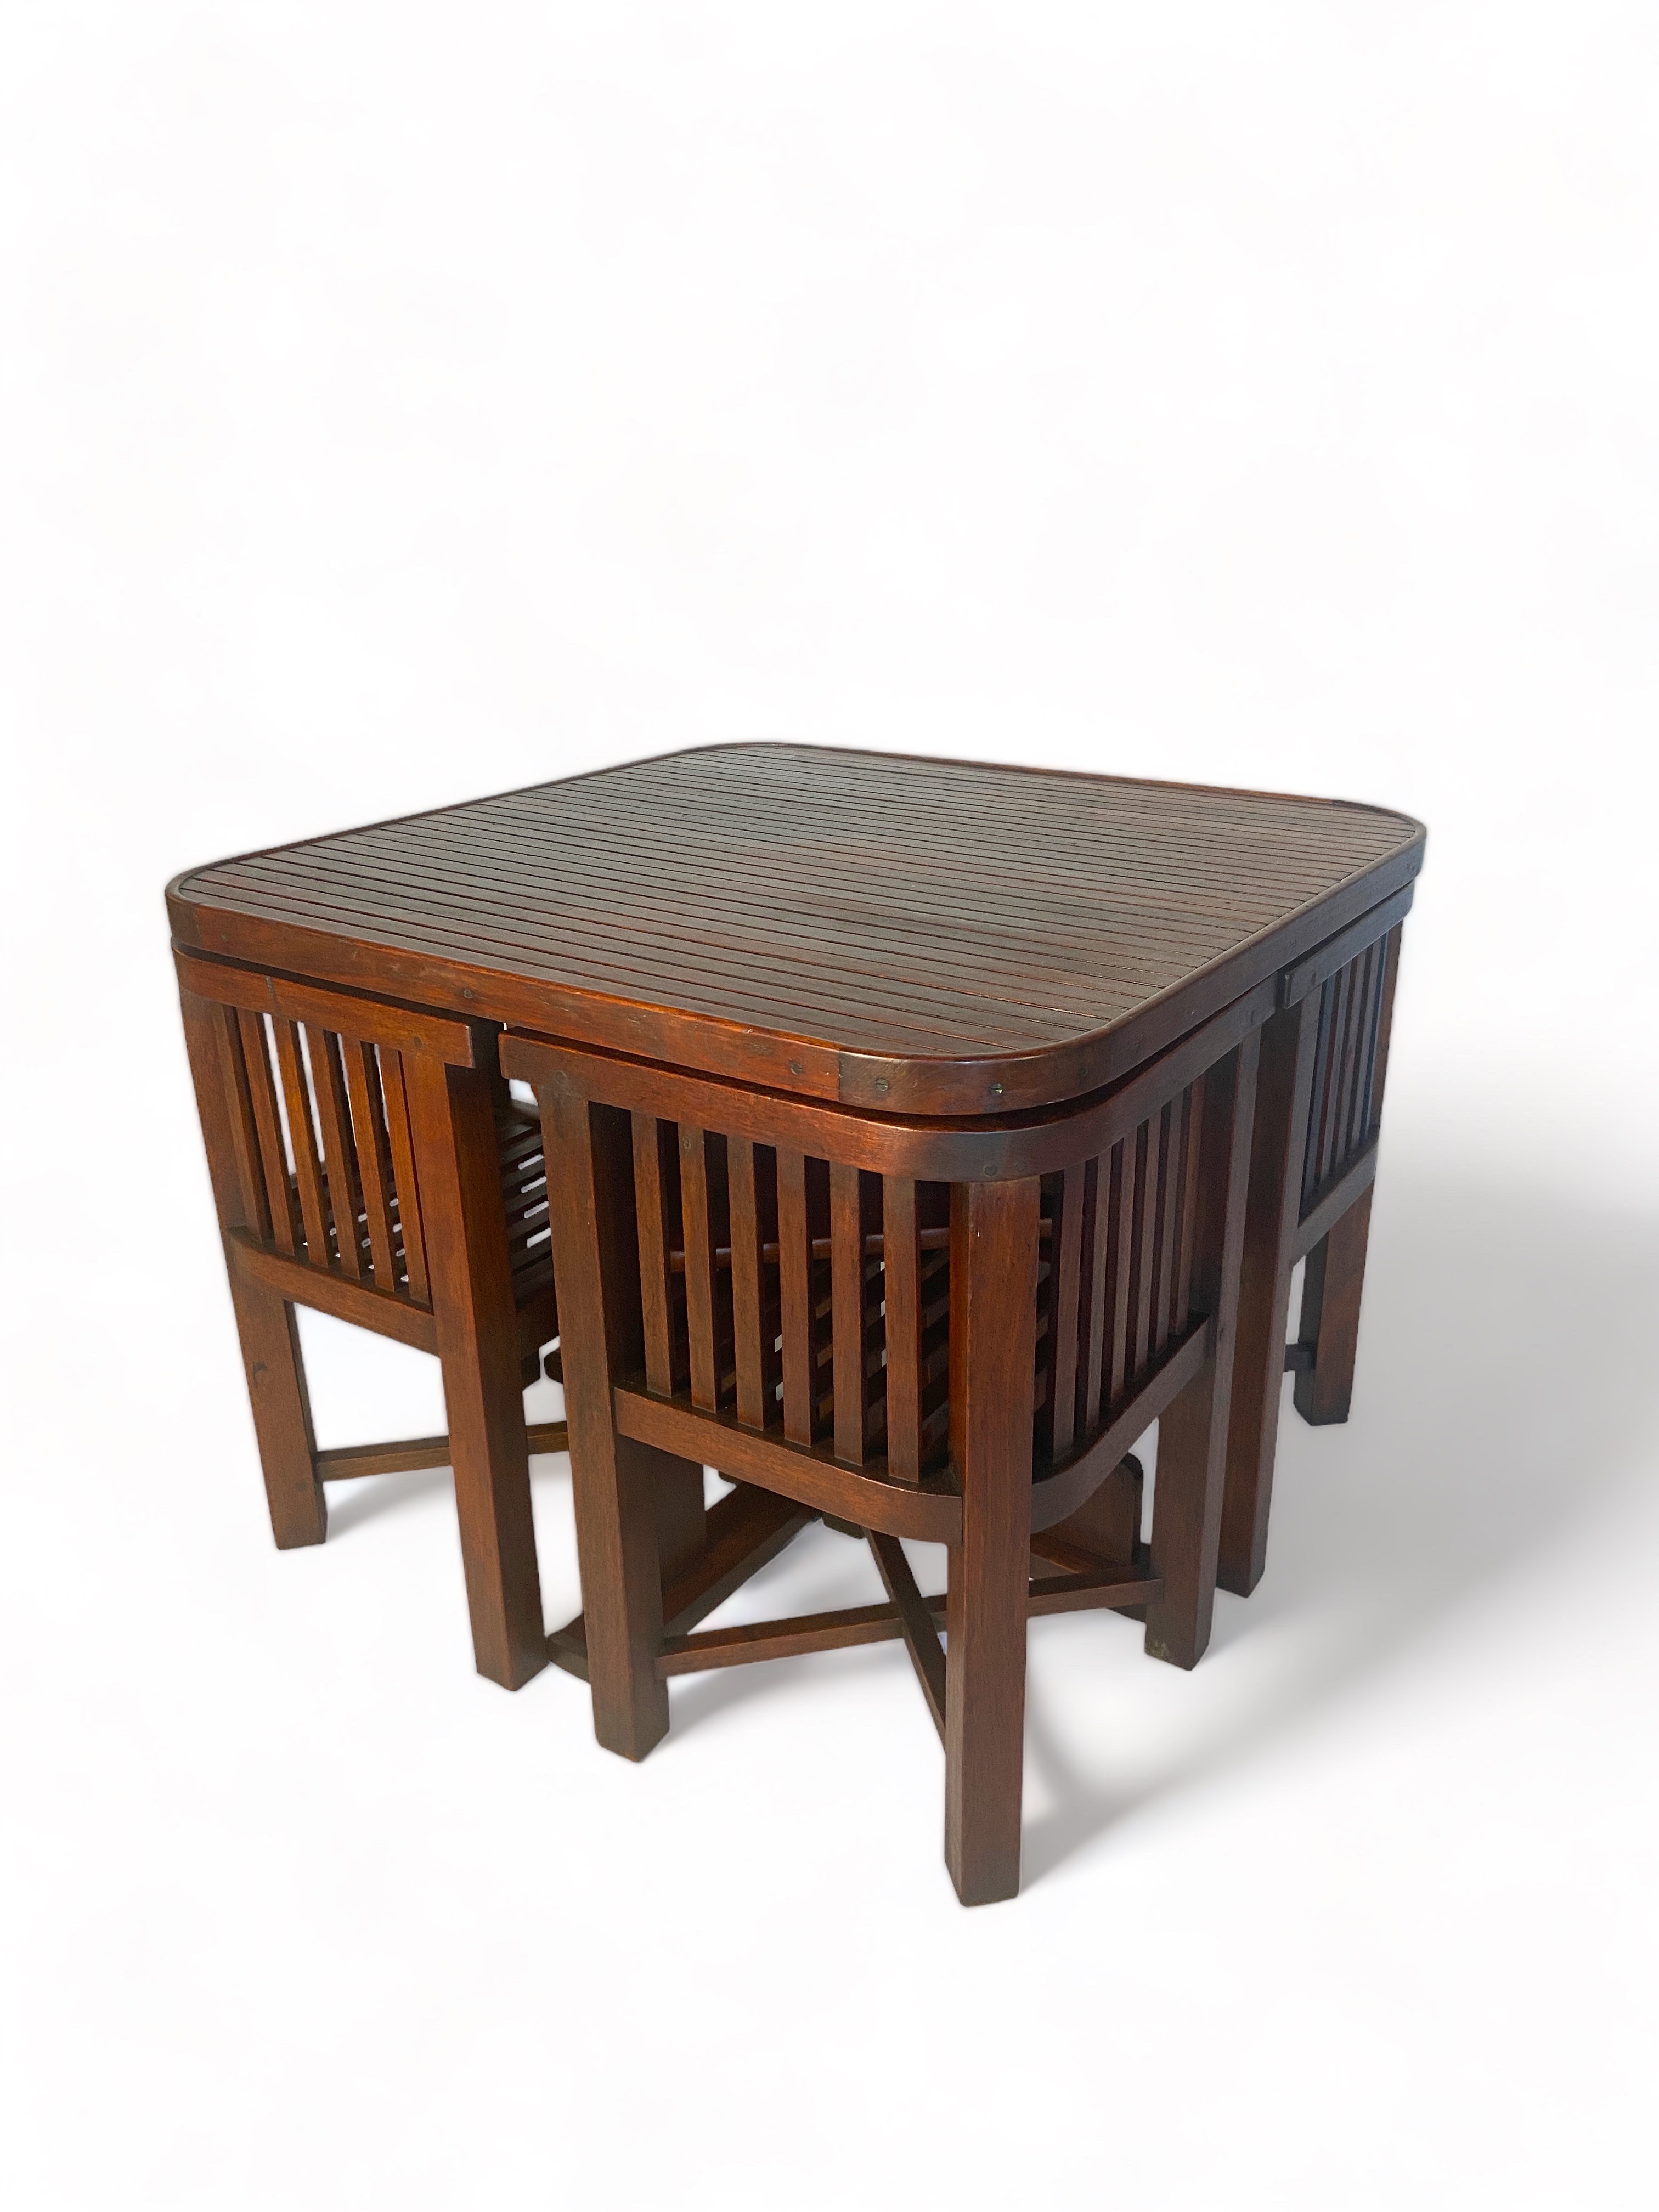 A 1930's Art Deco teak Collingwood design garden set of table and chairs by Castle's of London proba - Image 4 of 8